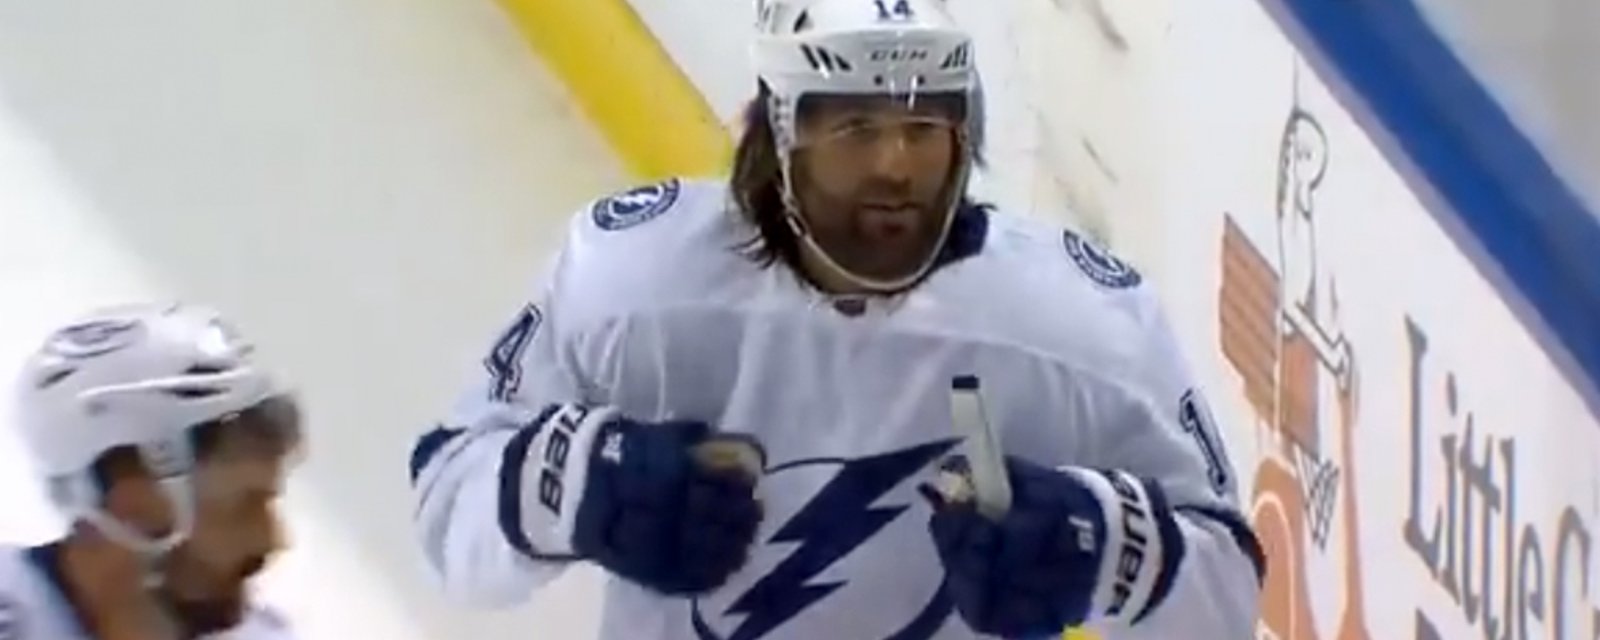 Pat Maroon chirps entire Panthers roster as they skate off the ice  